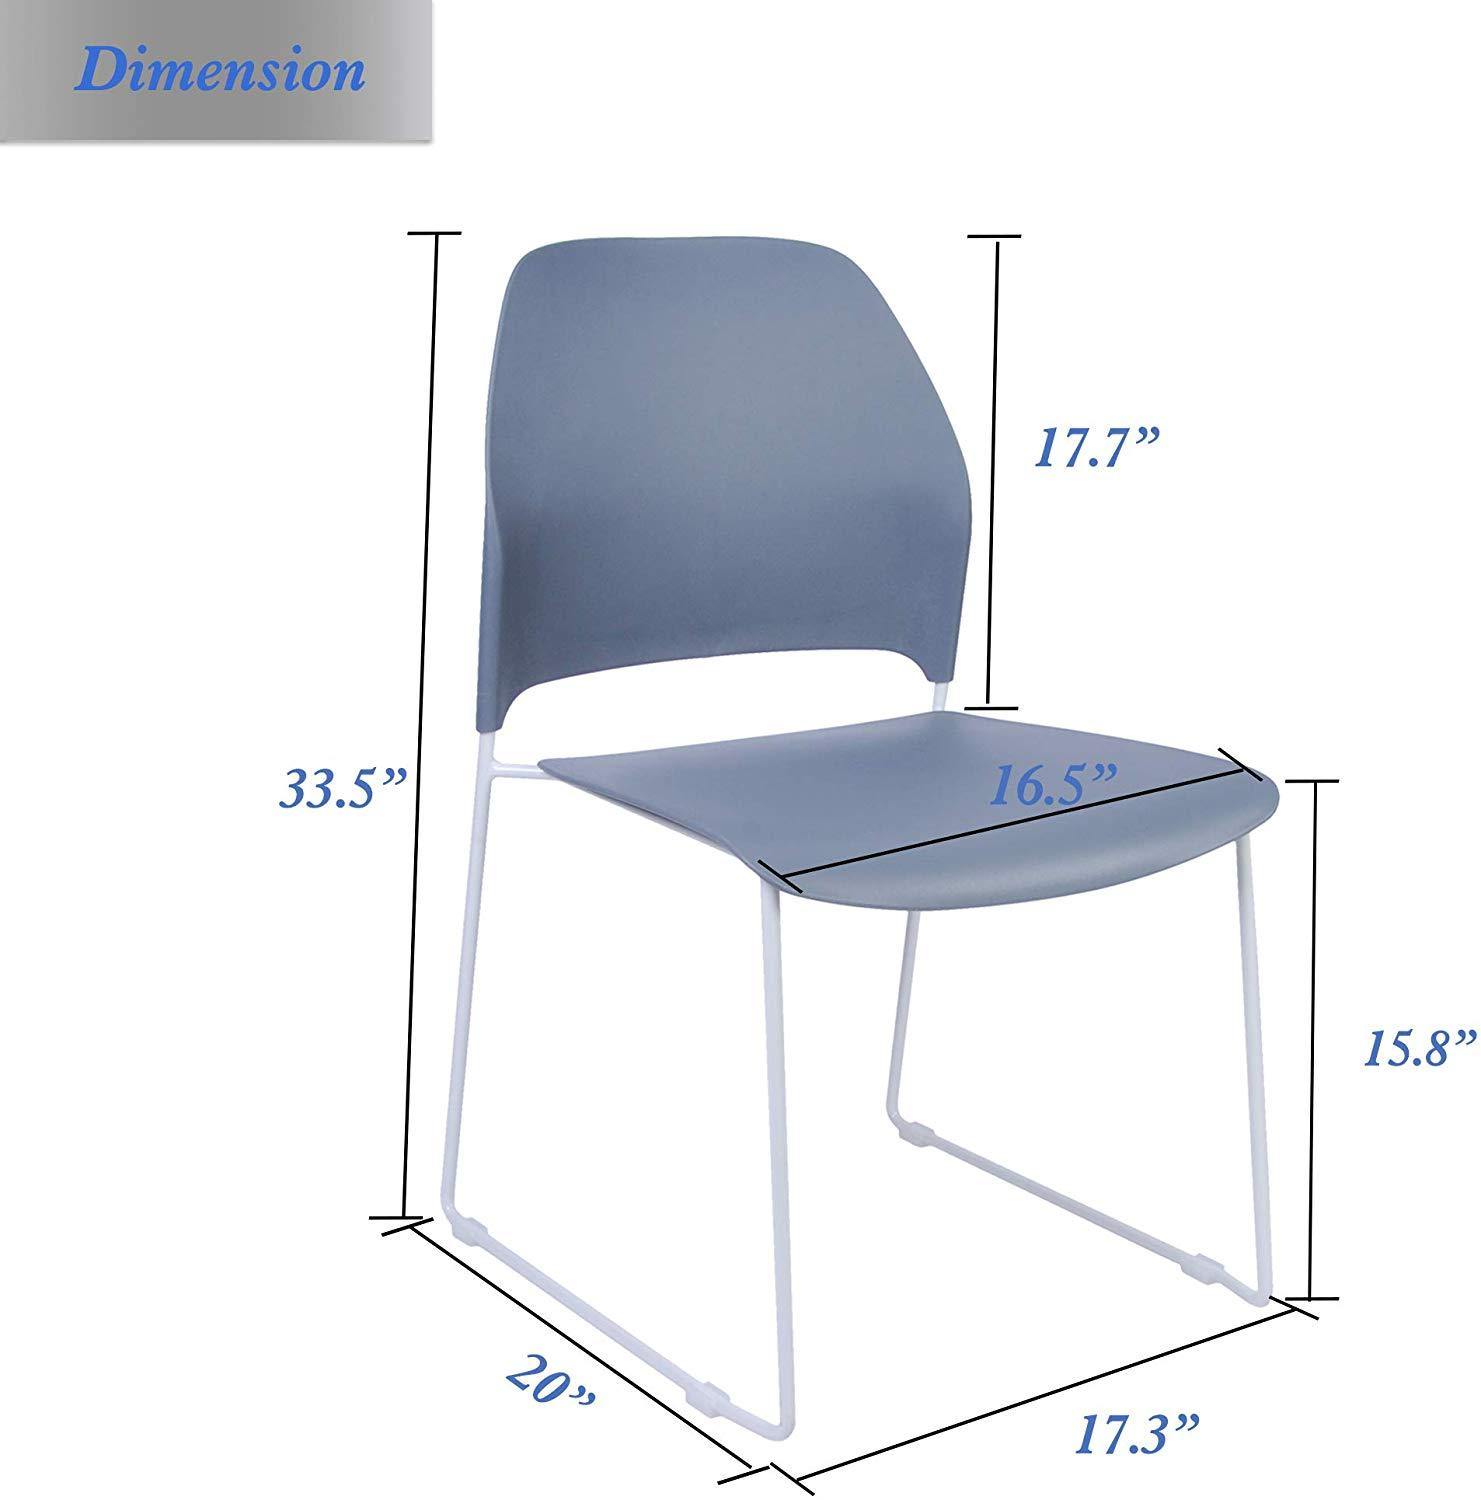 Lightweight Plastic School Stack Chair with Back Ultra-Compact Armless Office Desk Chair for Work Study Dining Gray (Set of 4) - Bosonshop